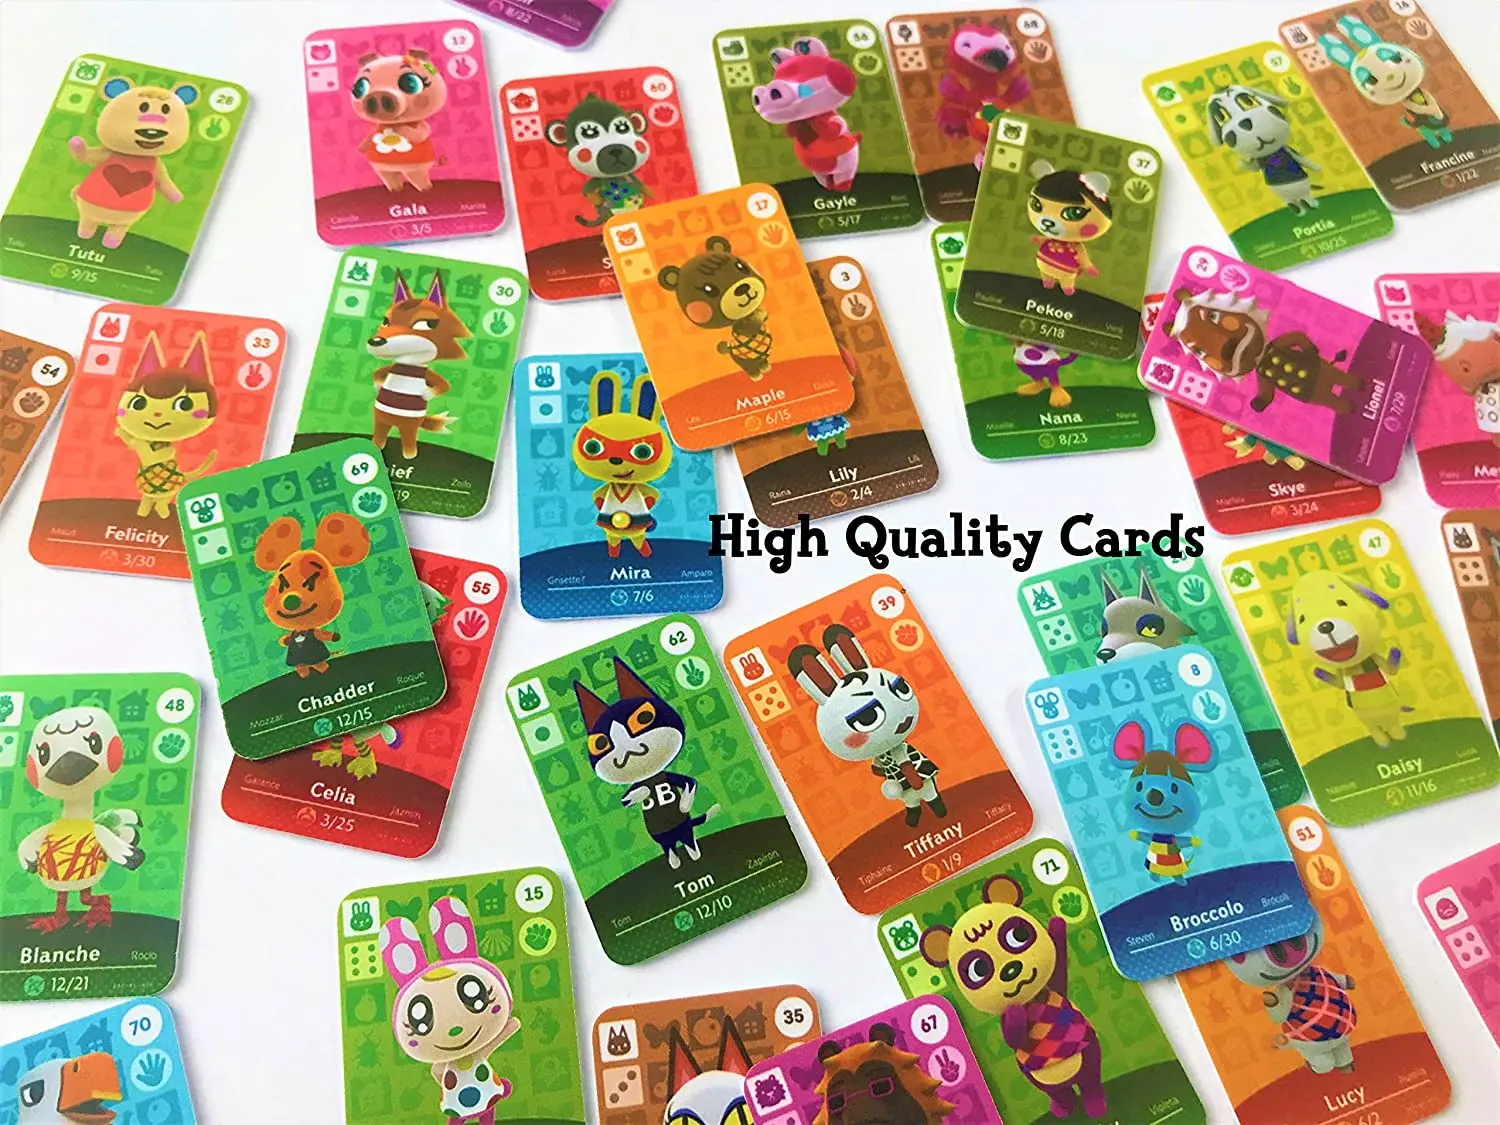 

72 PCS Animal Croxxing For Mini NFC Cards New Horizon Tag Game Card for Switch/Switch Lite/Wii U 31mmx21mm